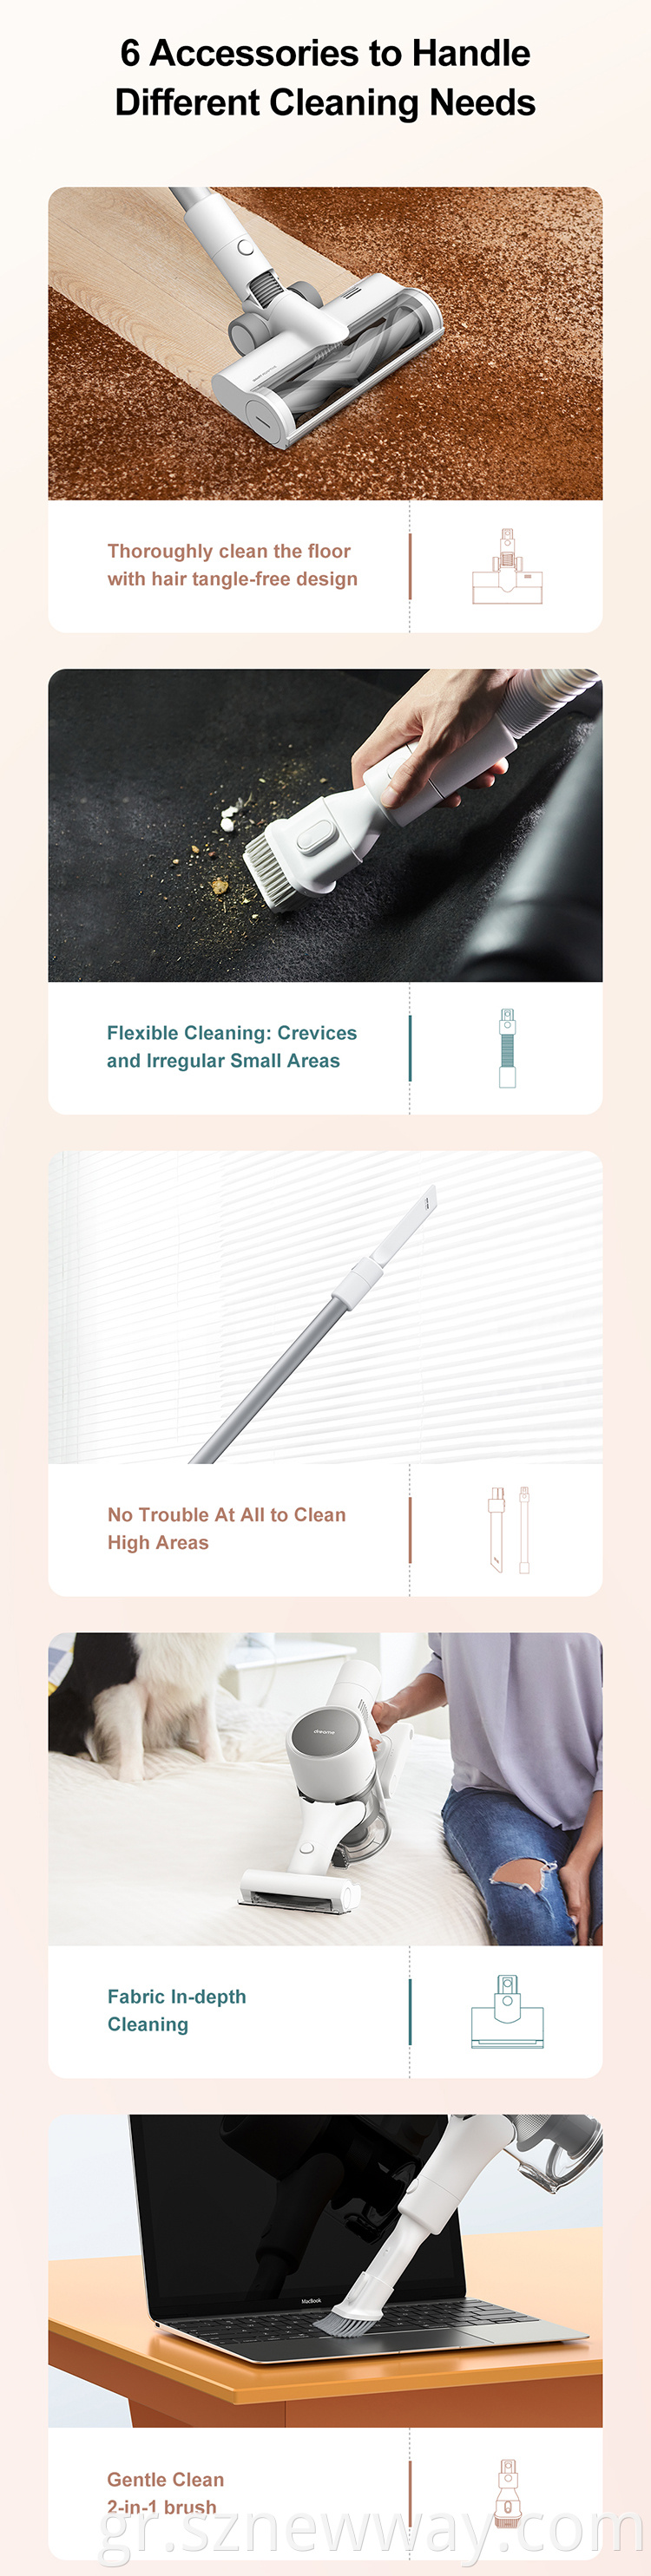 Dreame T10 Wireless Cleaner